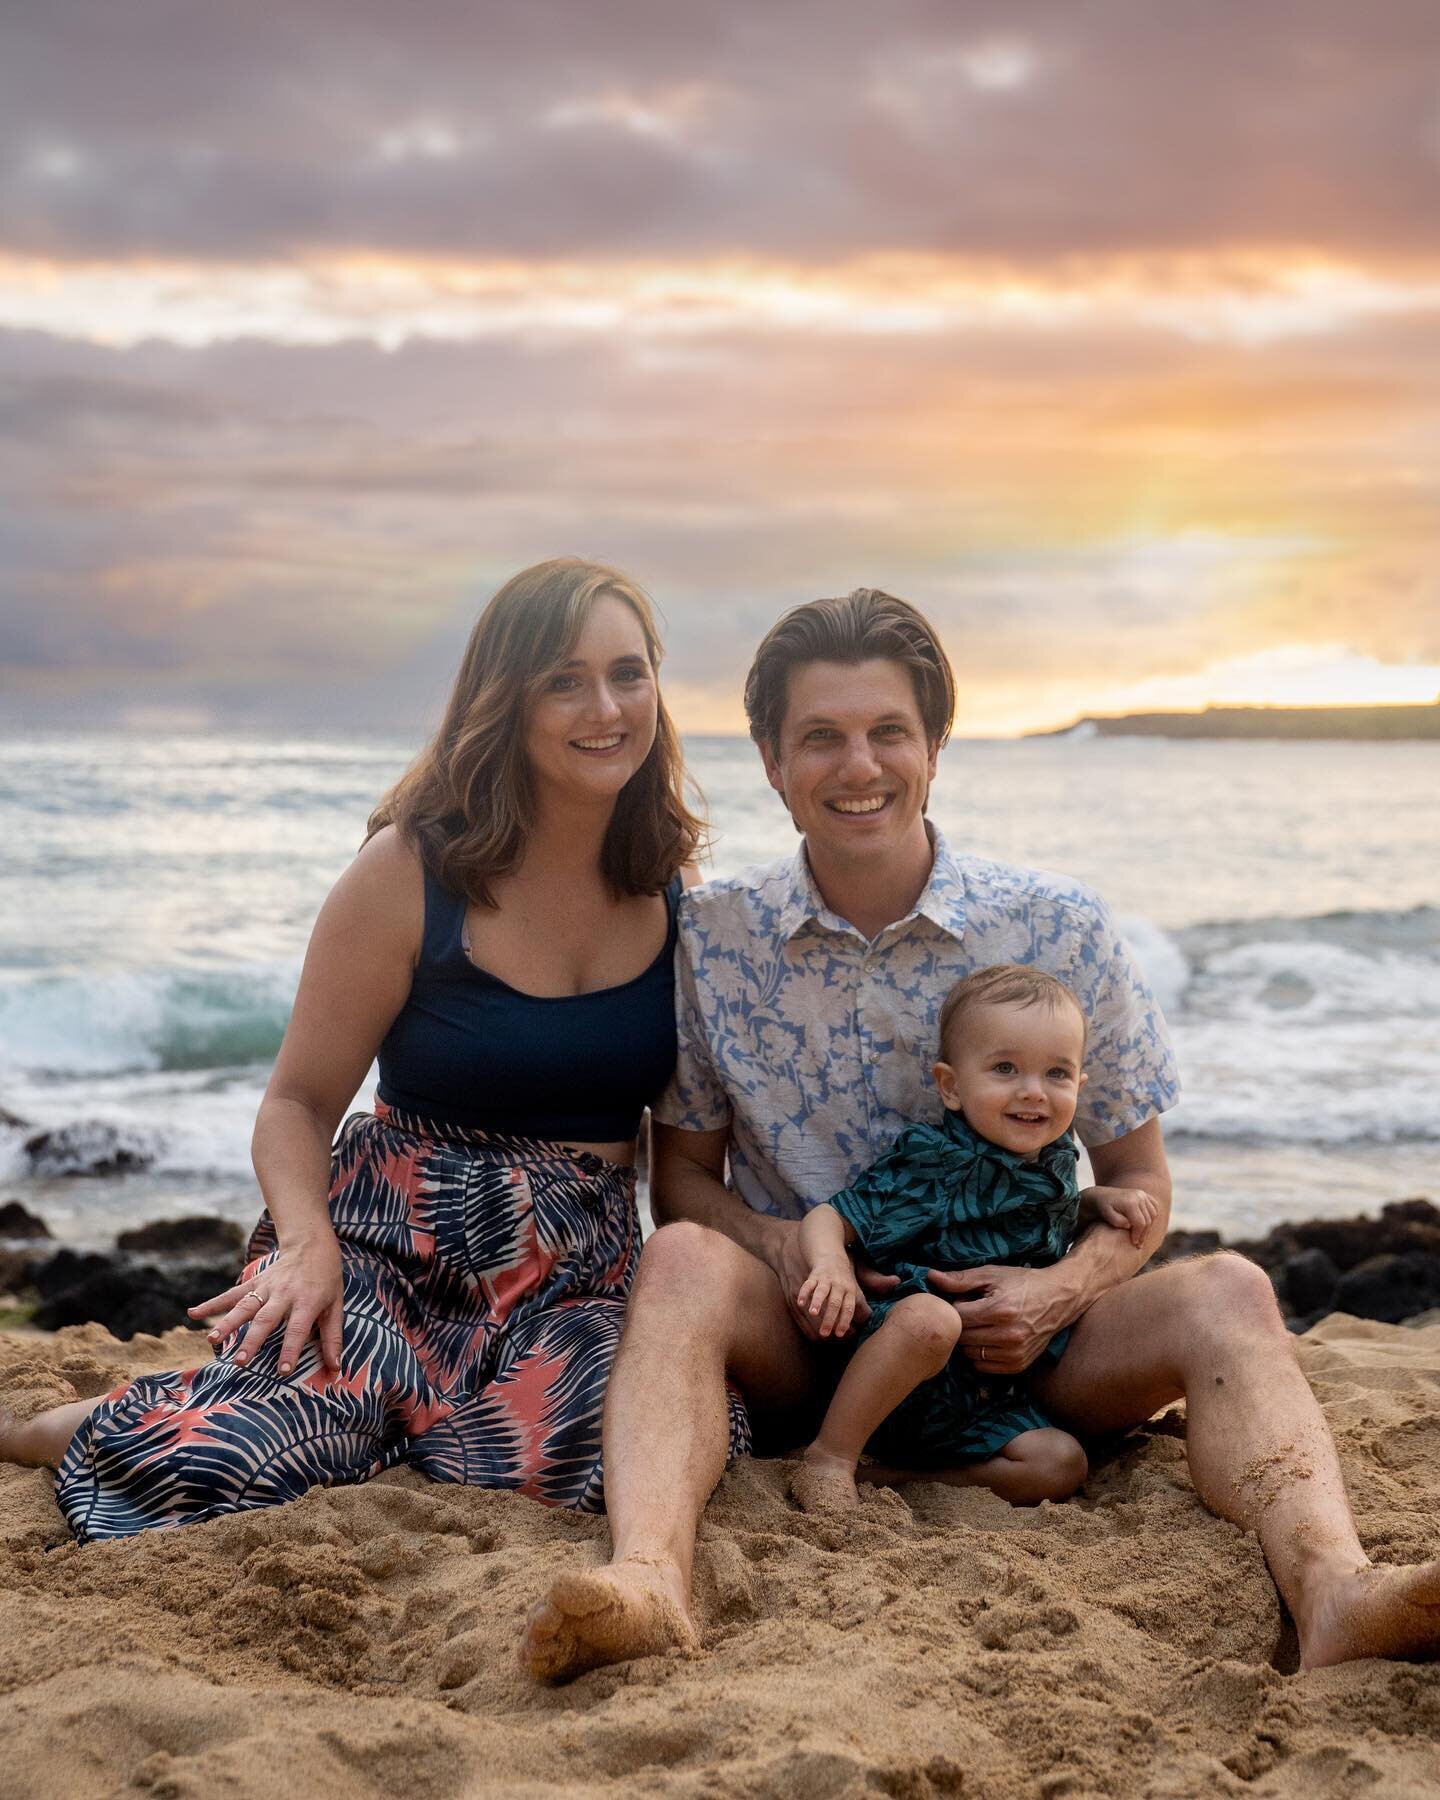 Family photos from our Hawaiian vacay. I&rsquo;ve been hoarding them for months and forgot to post!! It&rsquo;s so rude I know. What can I say, I&rsquo;m a lazy ho!